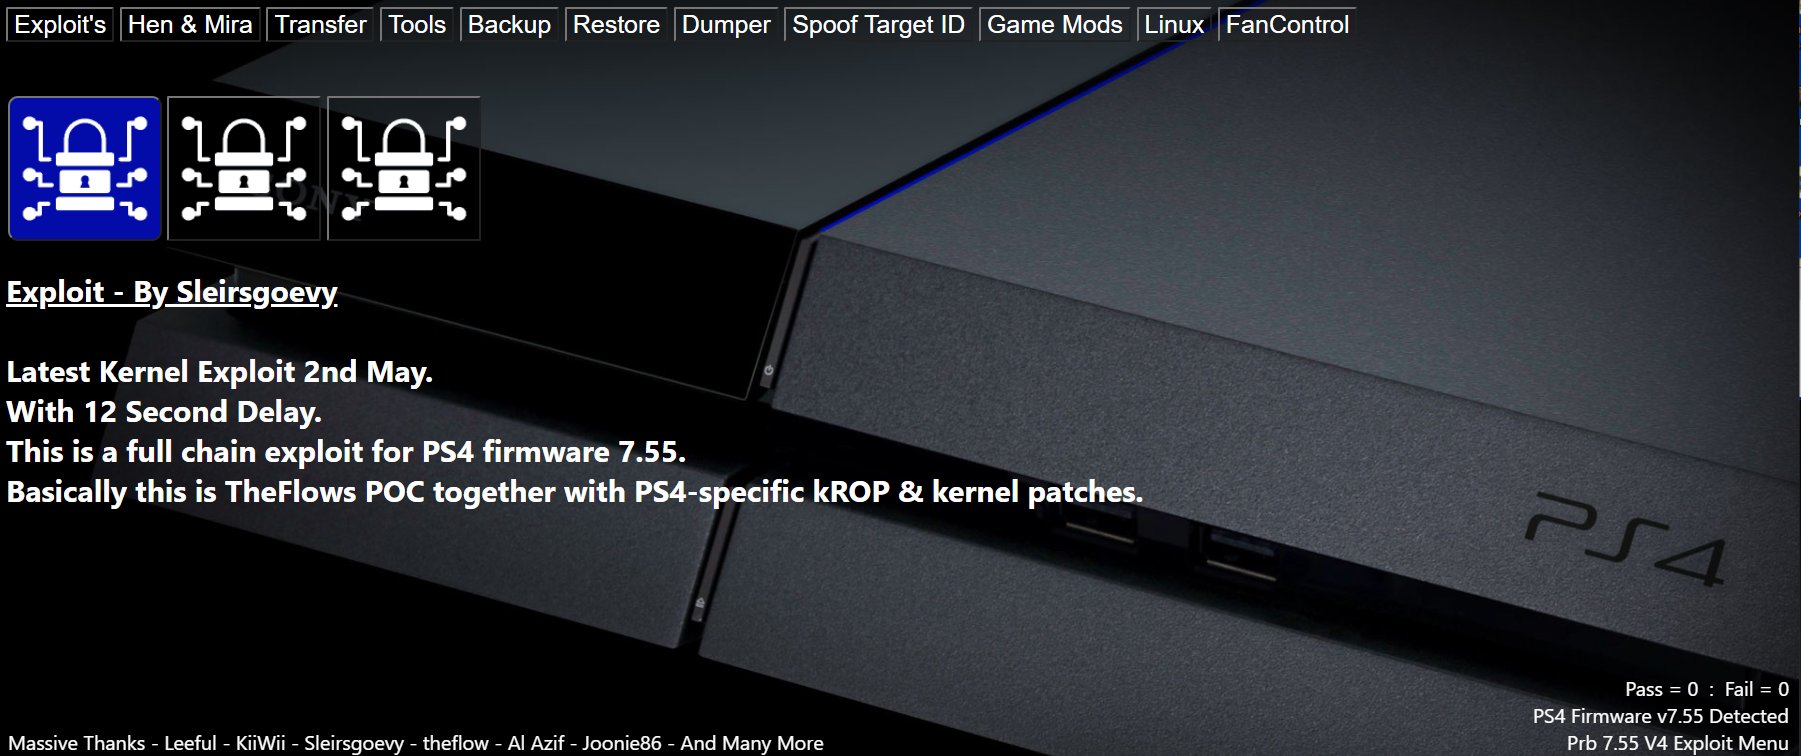 Night King v4.7 For PS4 Firmware 5.05 to 7.55